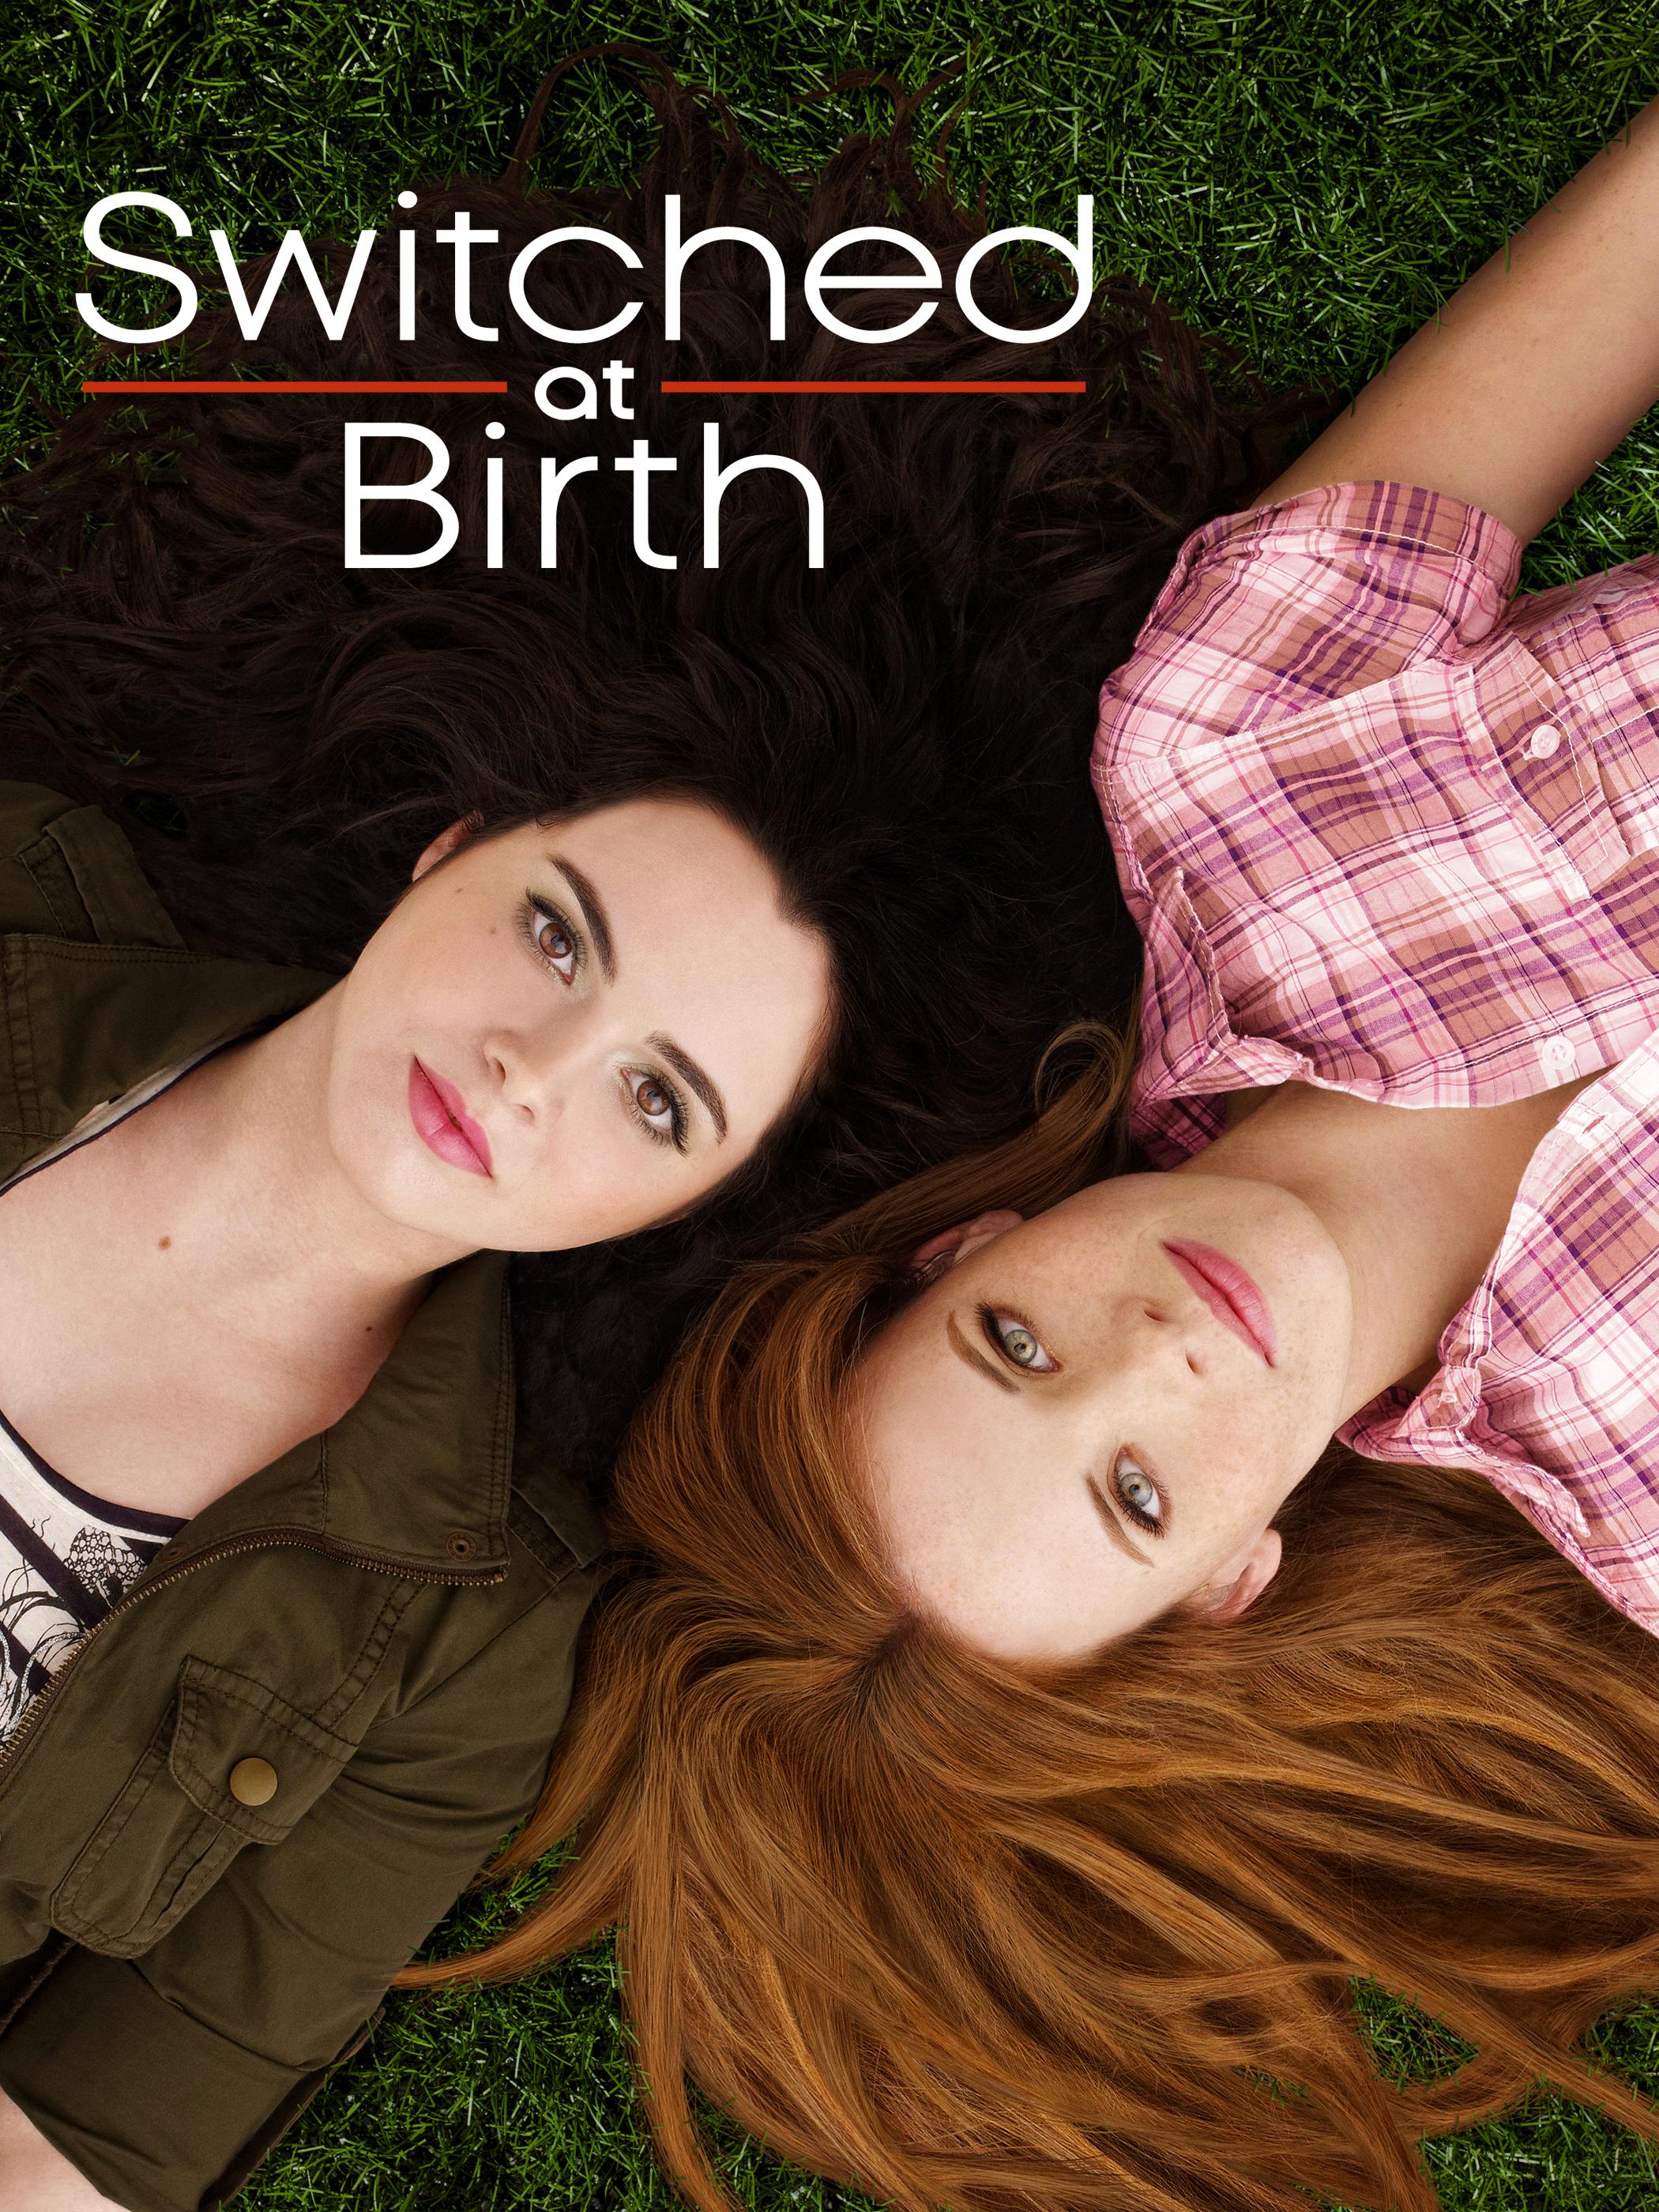 where to watch switched at birth